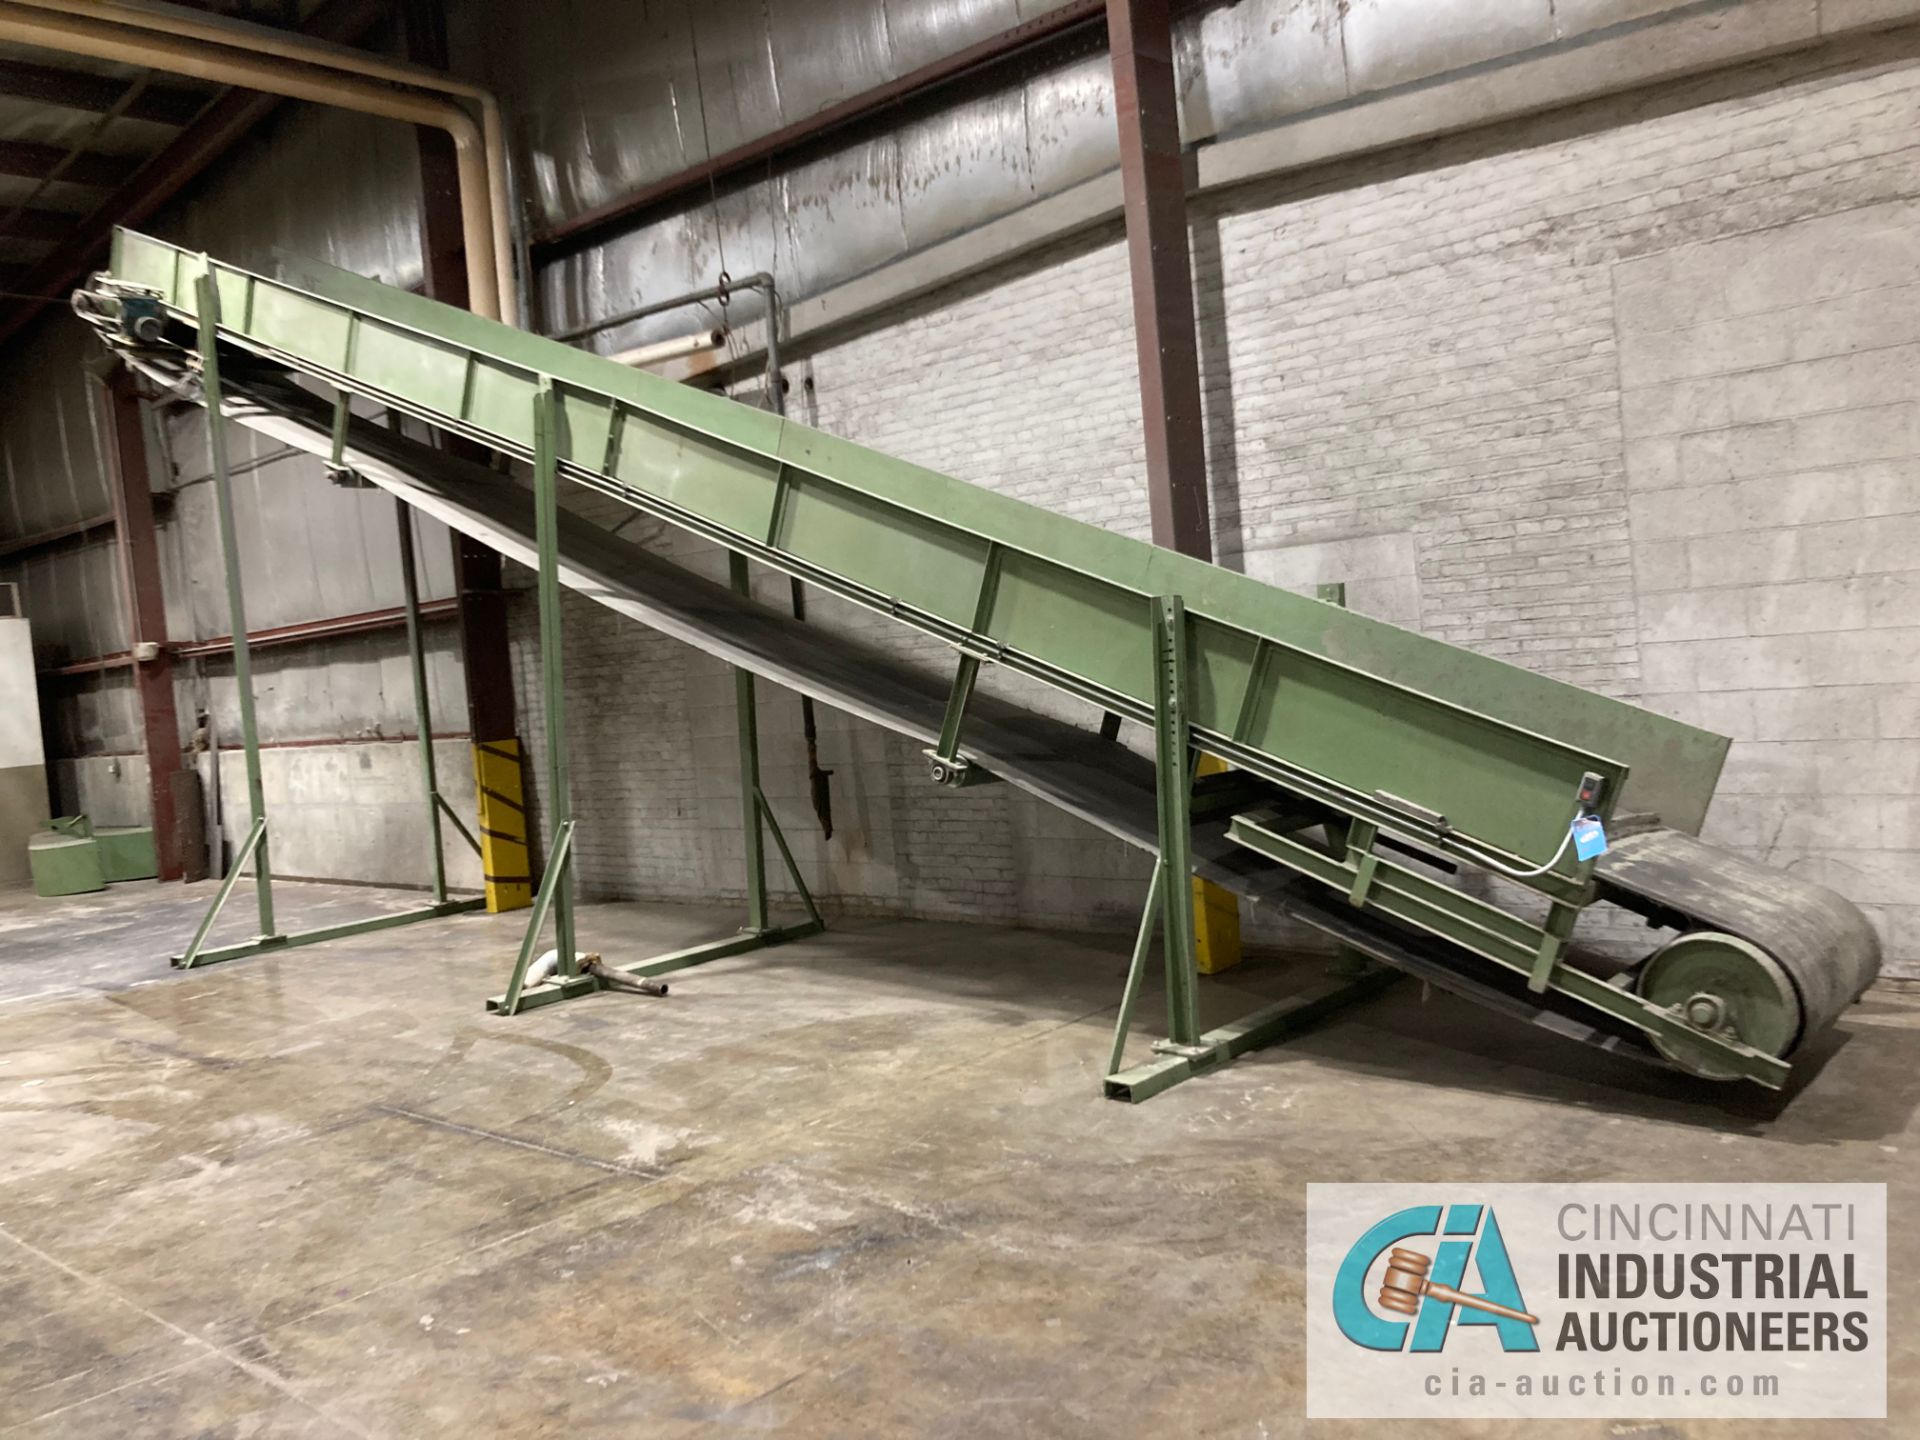 40" WIDE X 35' LONG CLEATED RUBBER BELT INCLINE CONVEYOR